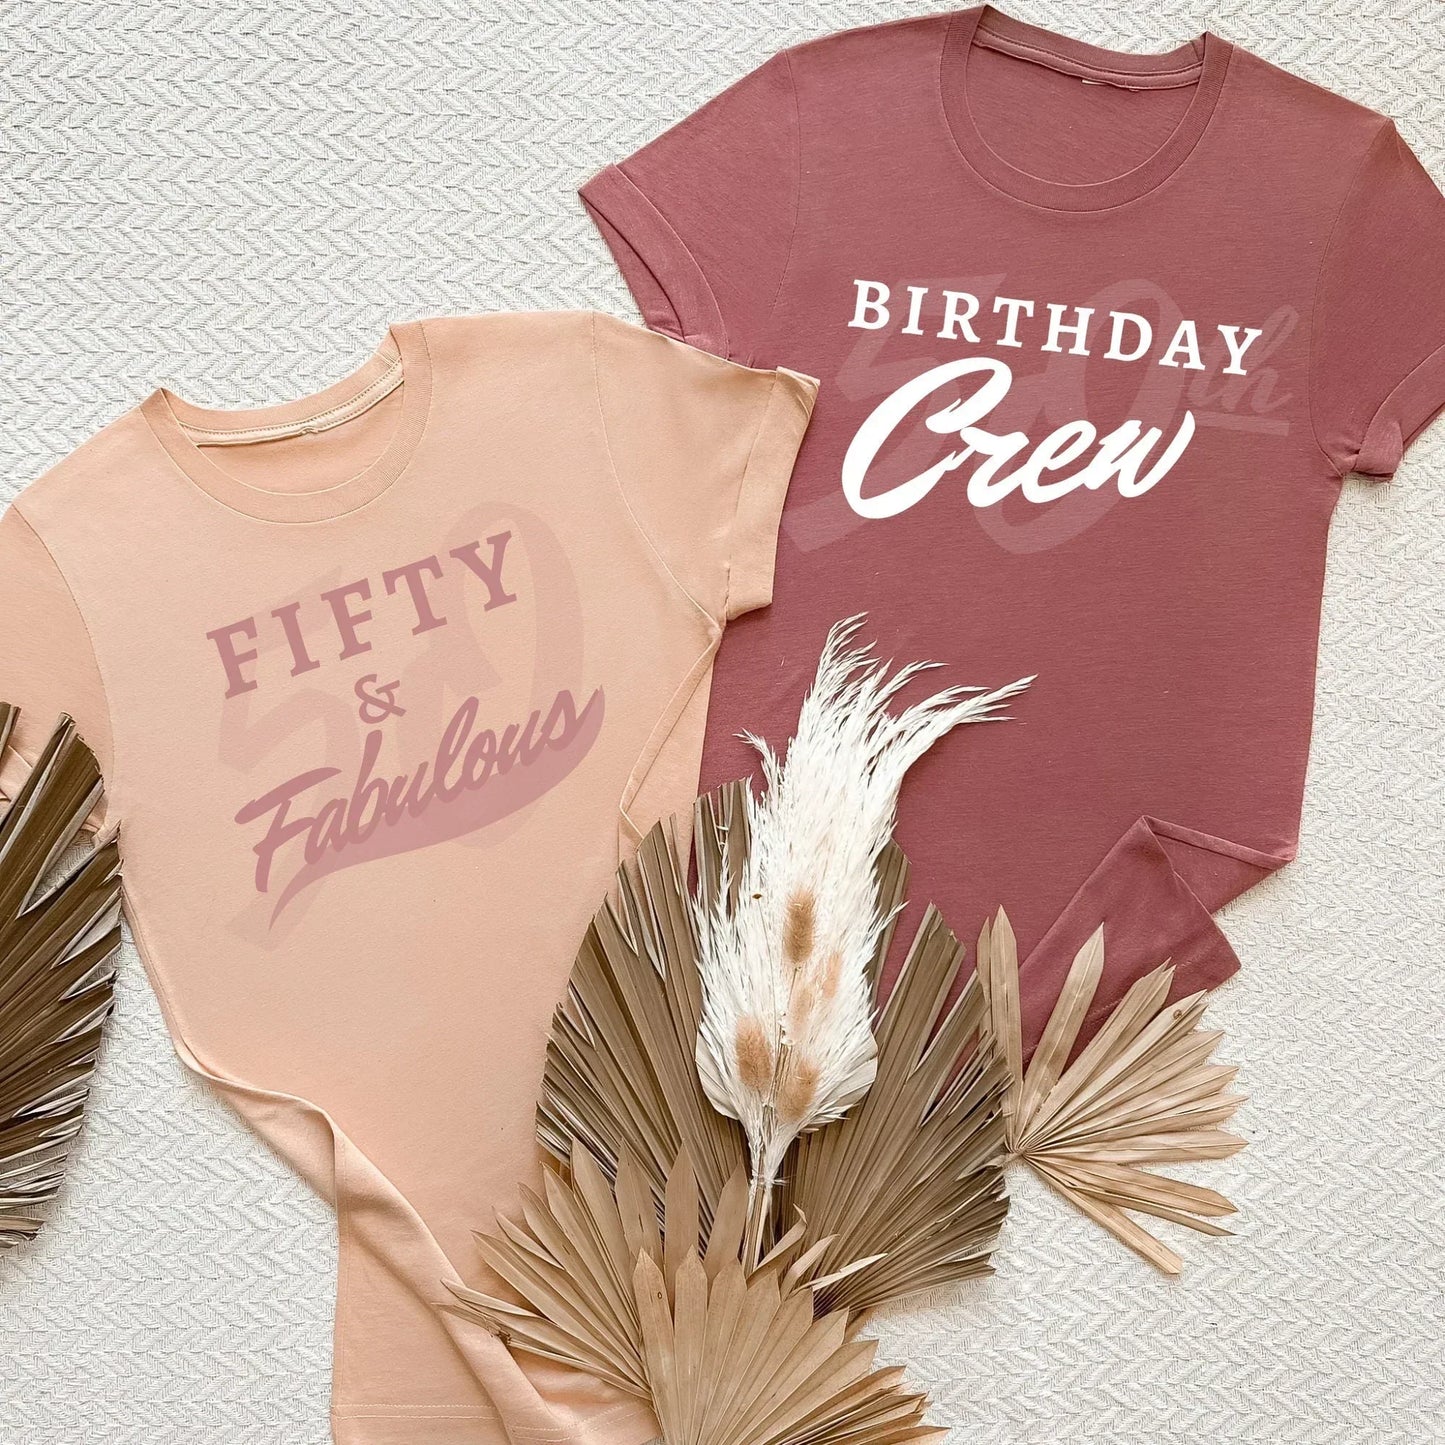 Fifty and Fabulous Shirt, 50th Birthday Shirt - Celebrate Your Milestone in Style! HMDesignStudioUS